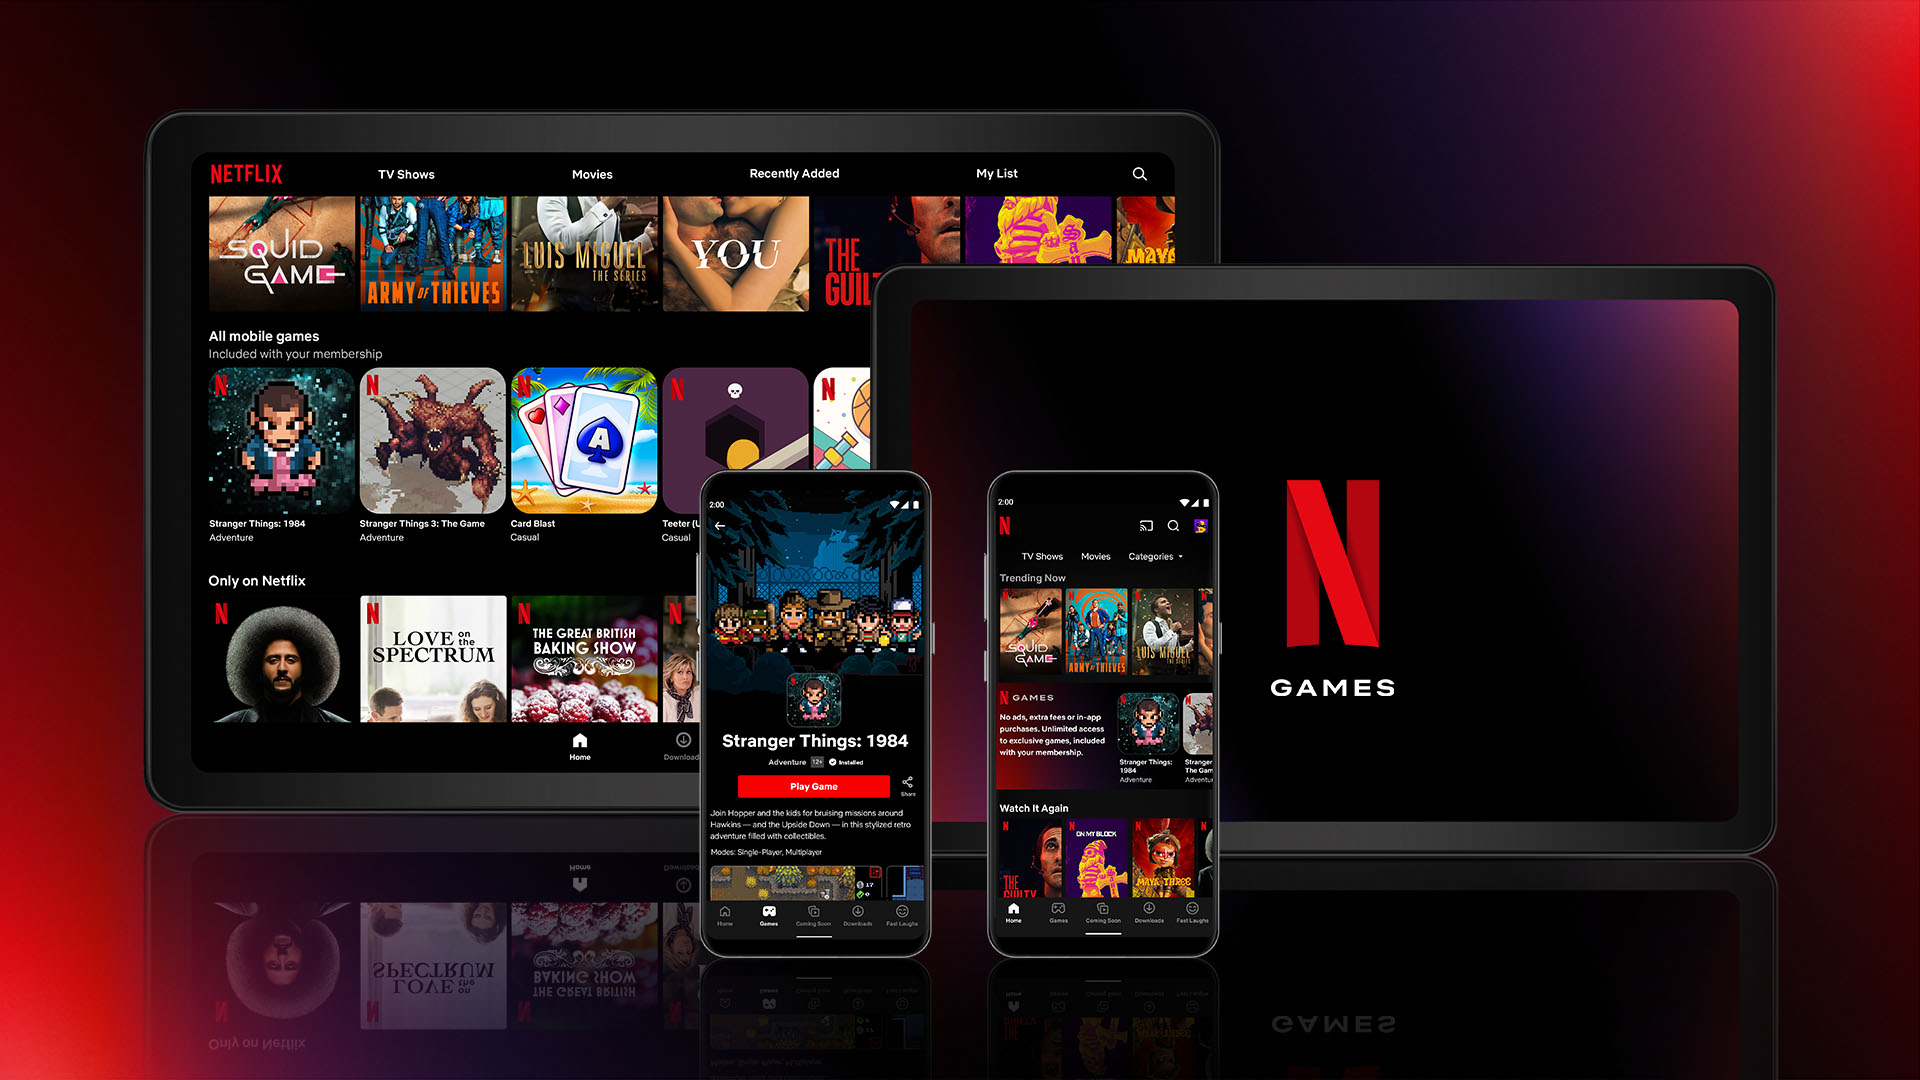 A variety of devices running Netflix's range of games